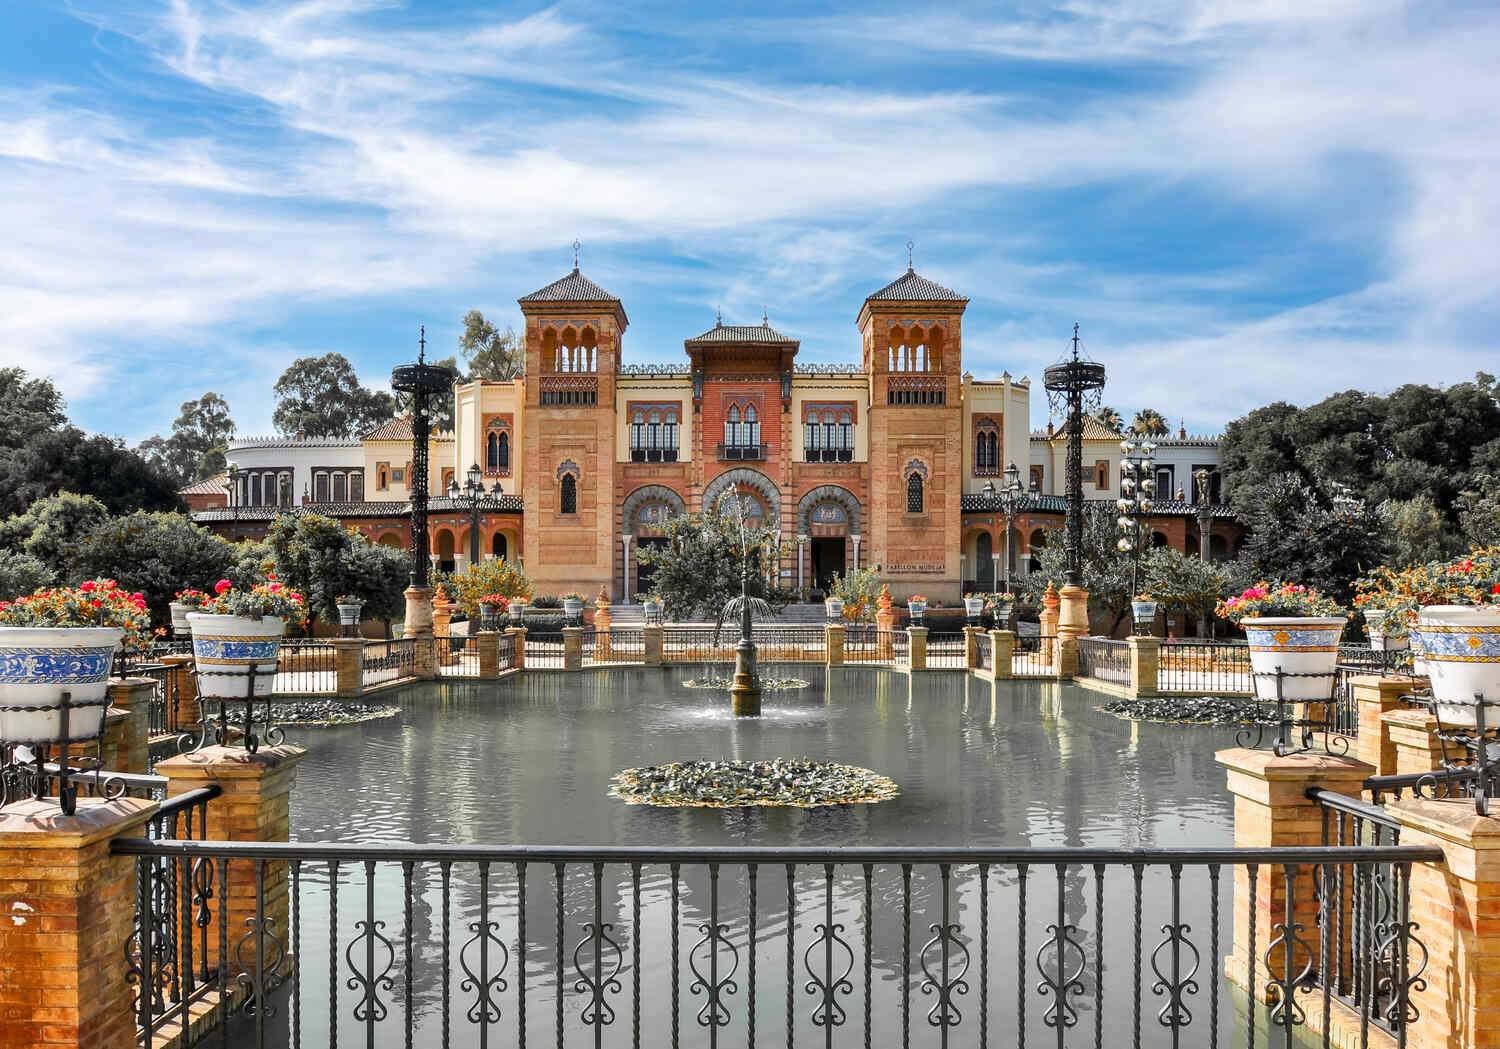 Parque de Maria Luisa in Seville with a fountain and historical building